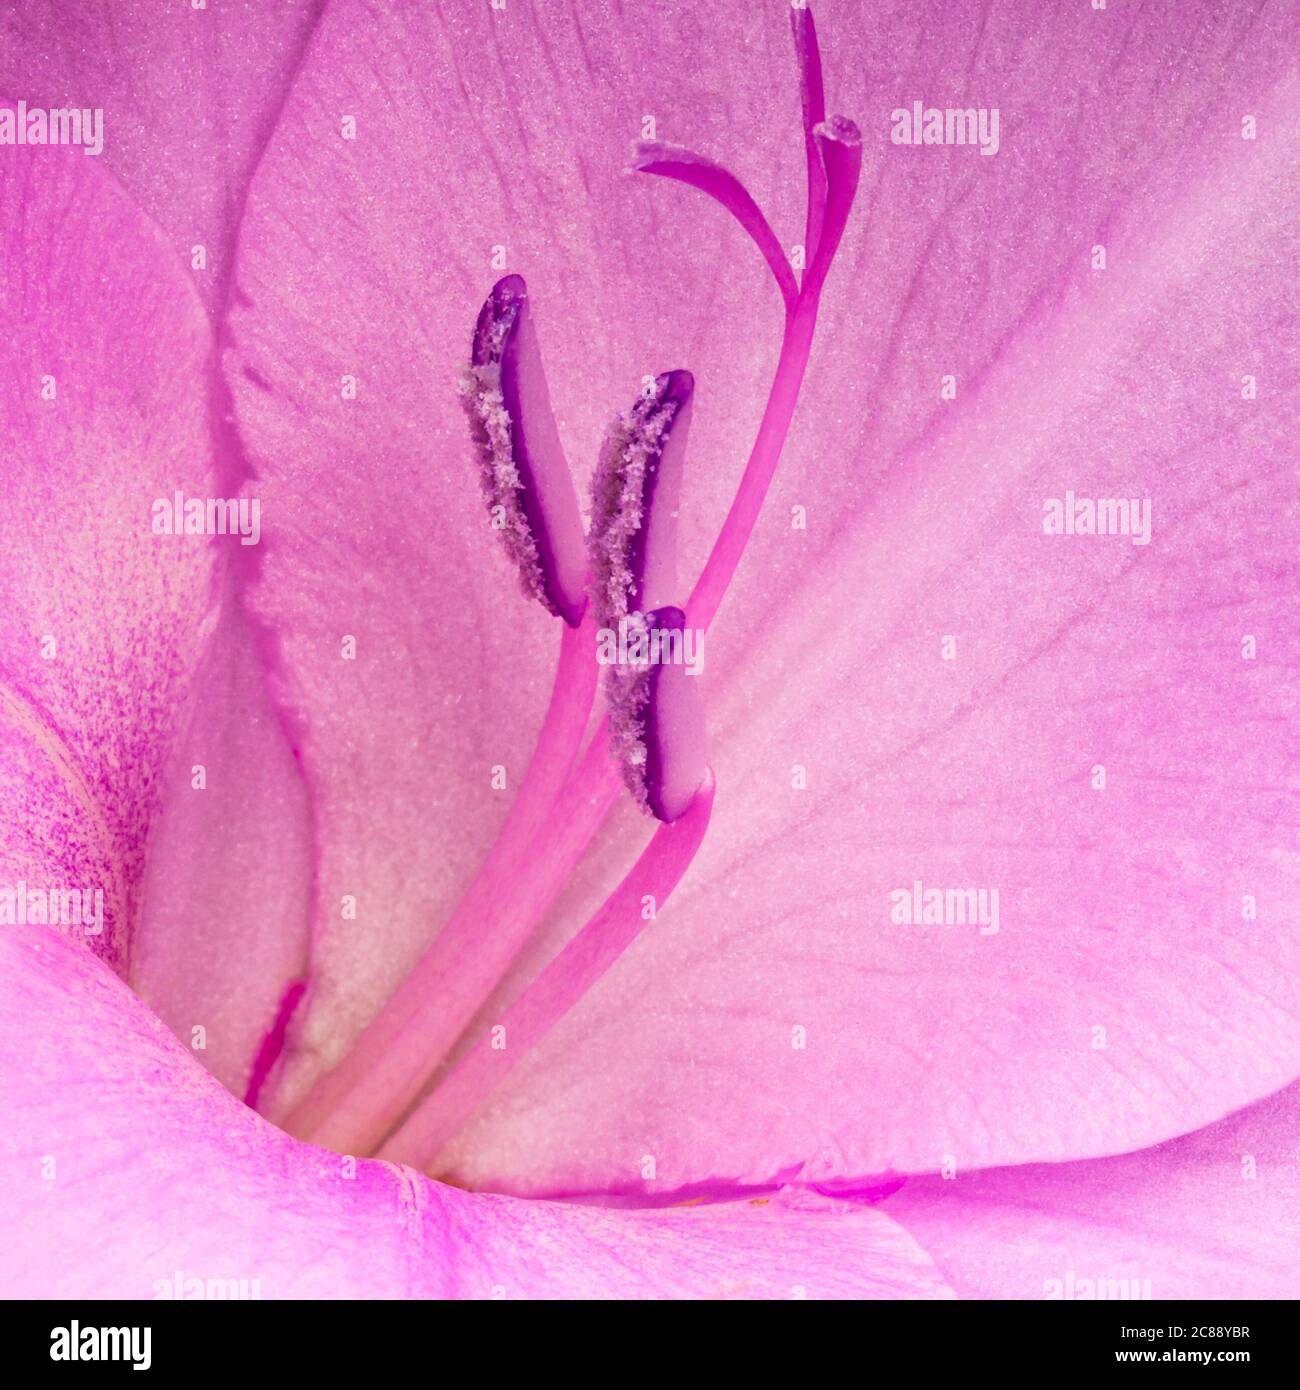 Gladiolus in close up Stock Photo